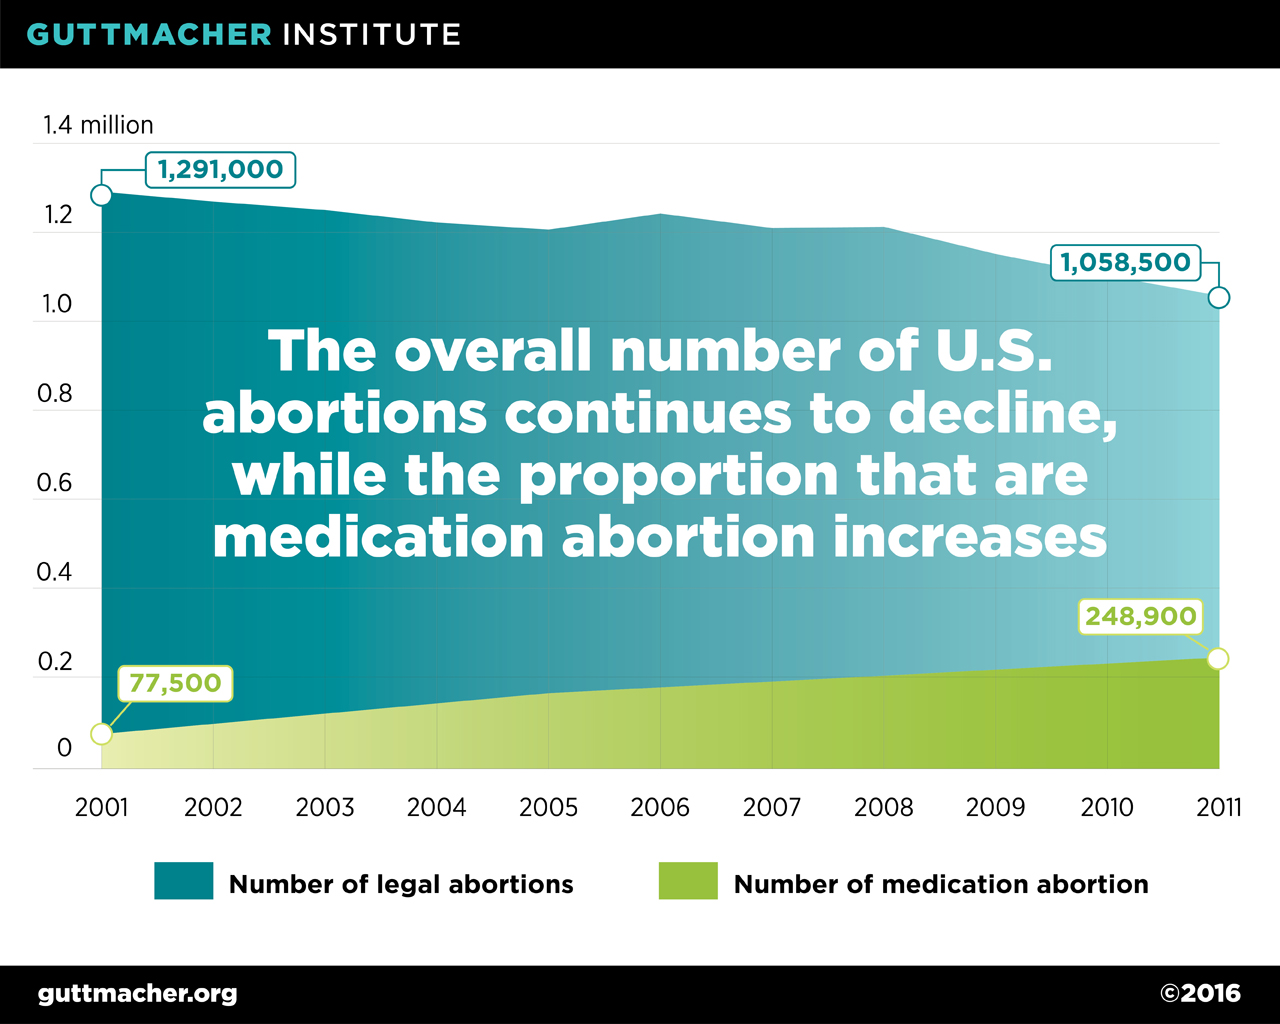 The overall number of U.S. abortions continues to decline, while the proportion that are medication abortion increases